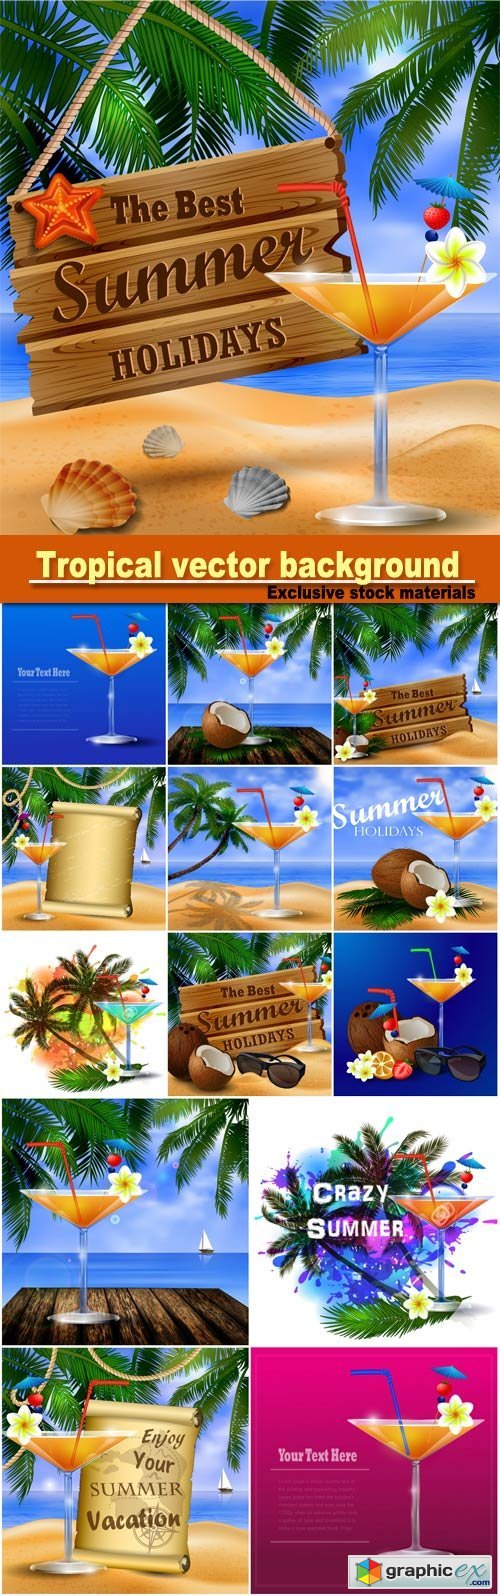 Tropical vector background with leaves of palm trees